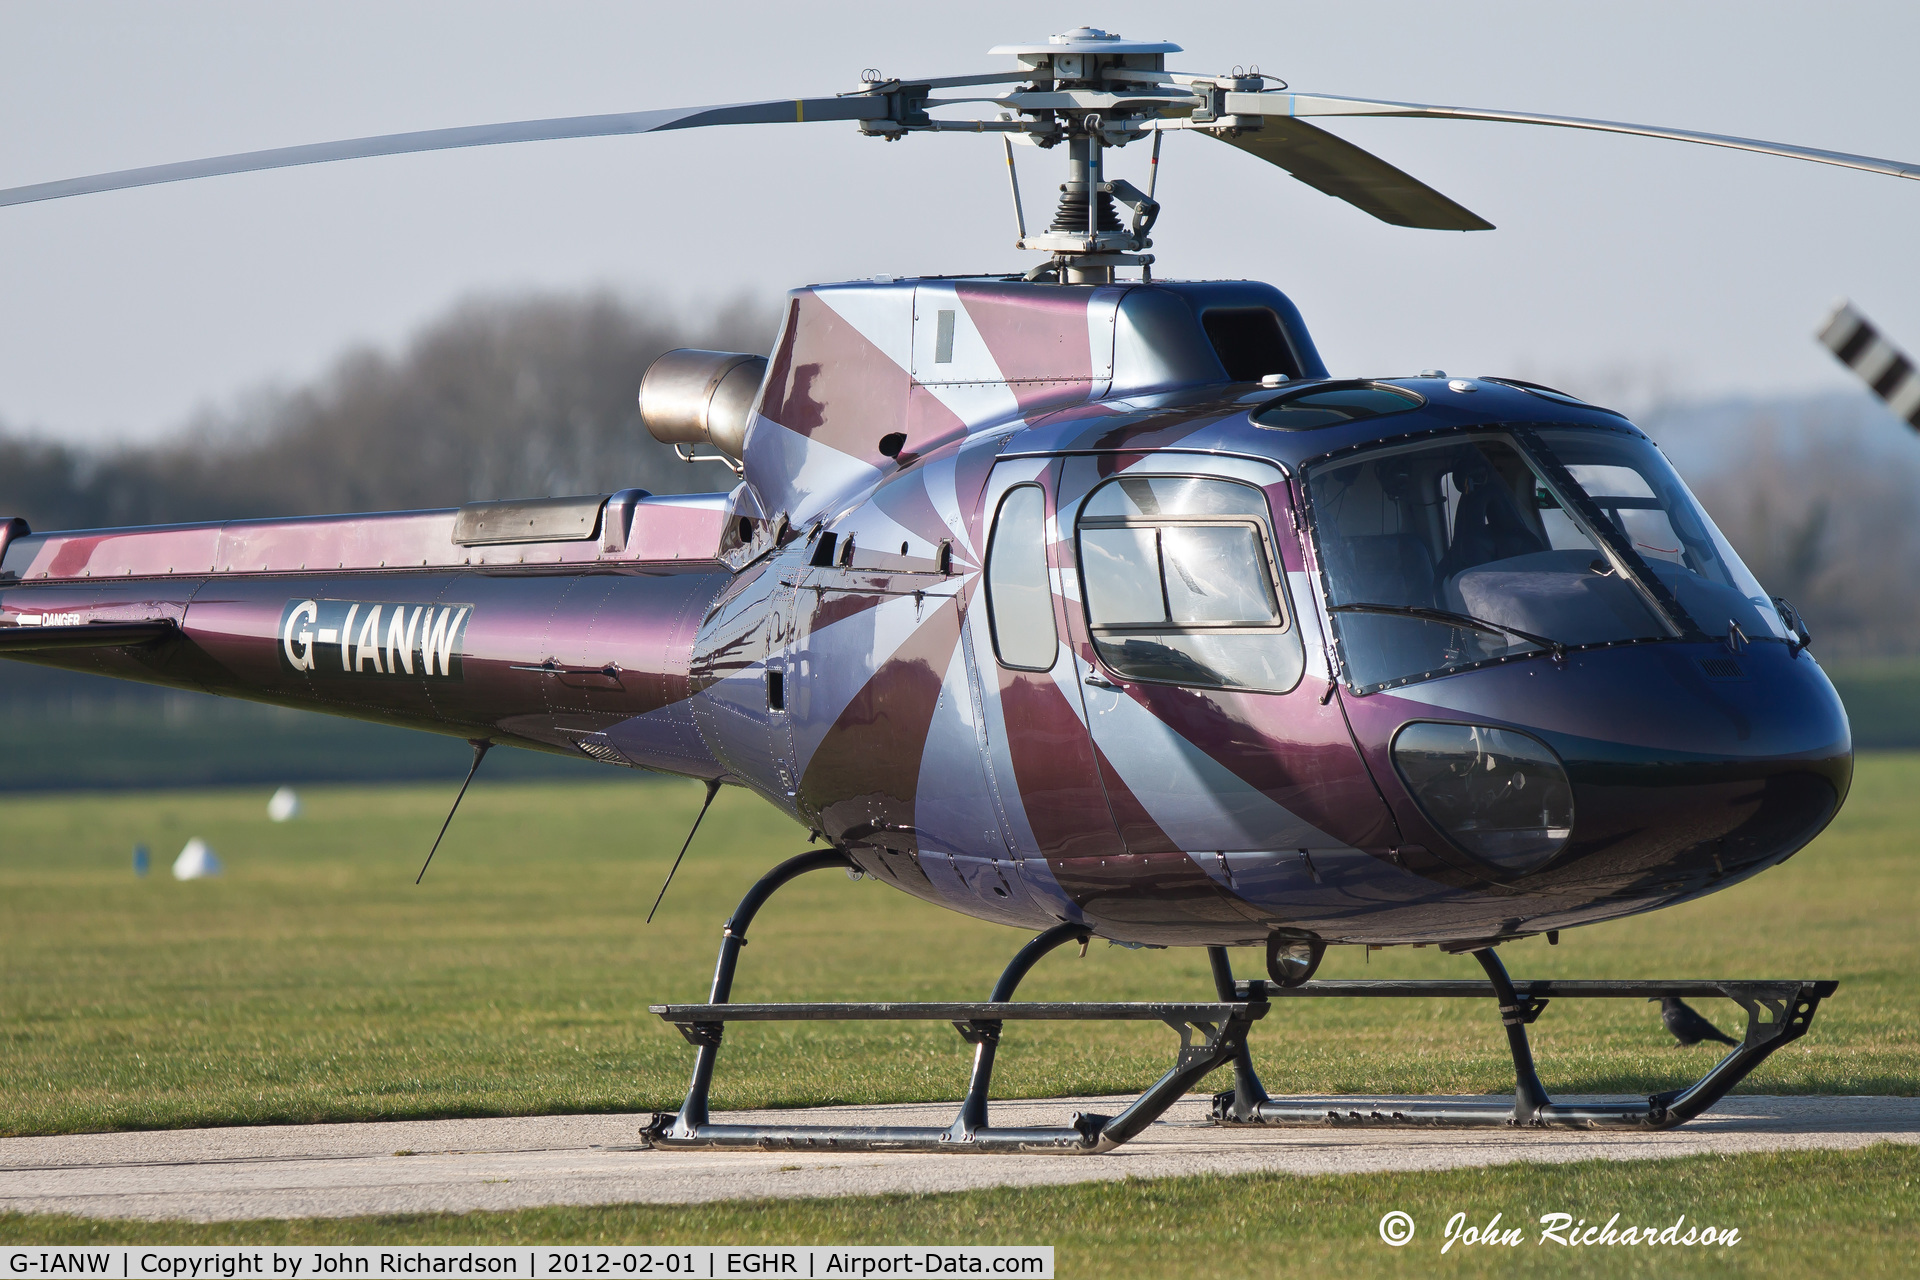 G-IANW, 2000 Eurocopter AS-350B-3 Ecureuil Ecureuil C/N 3447, On the Heli pad at Goodwood